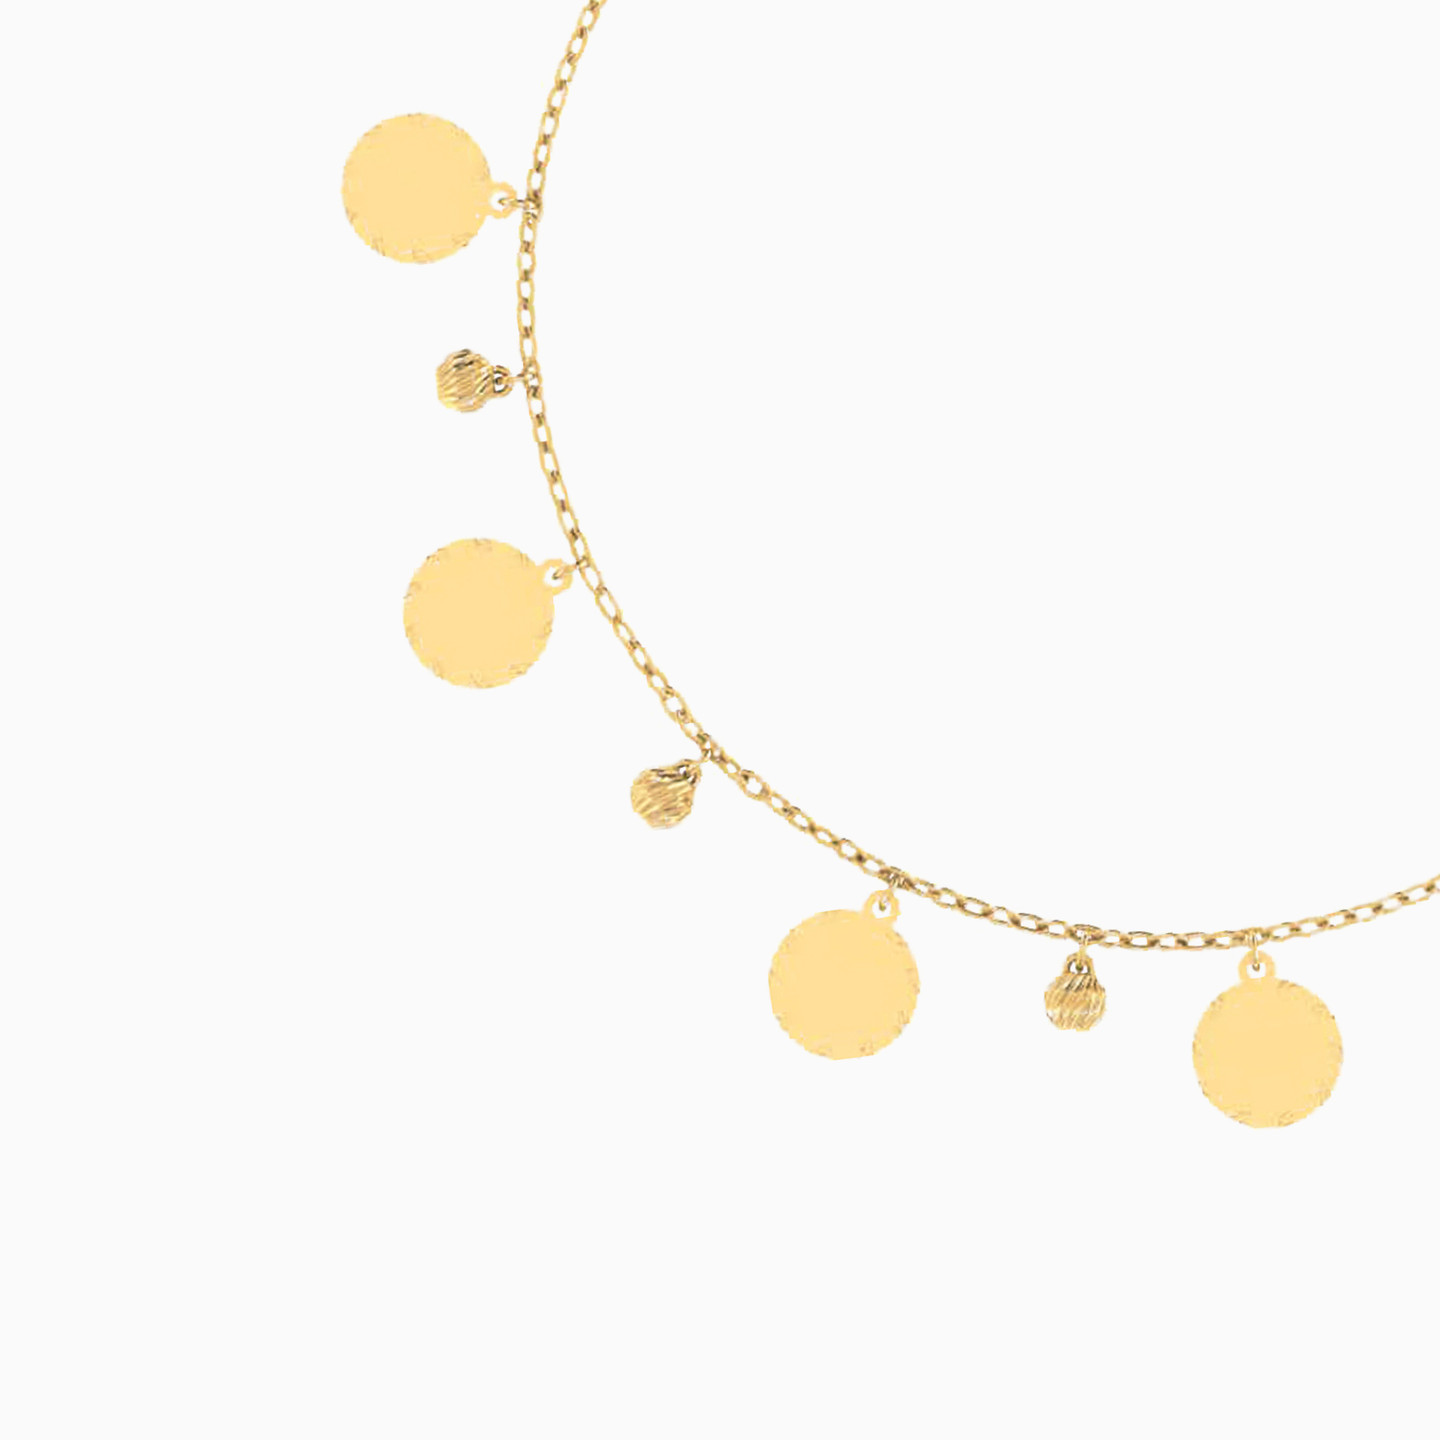 18K Gold Chain Necklace - 2